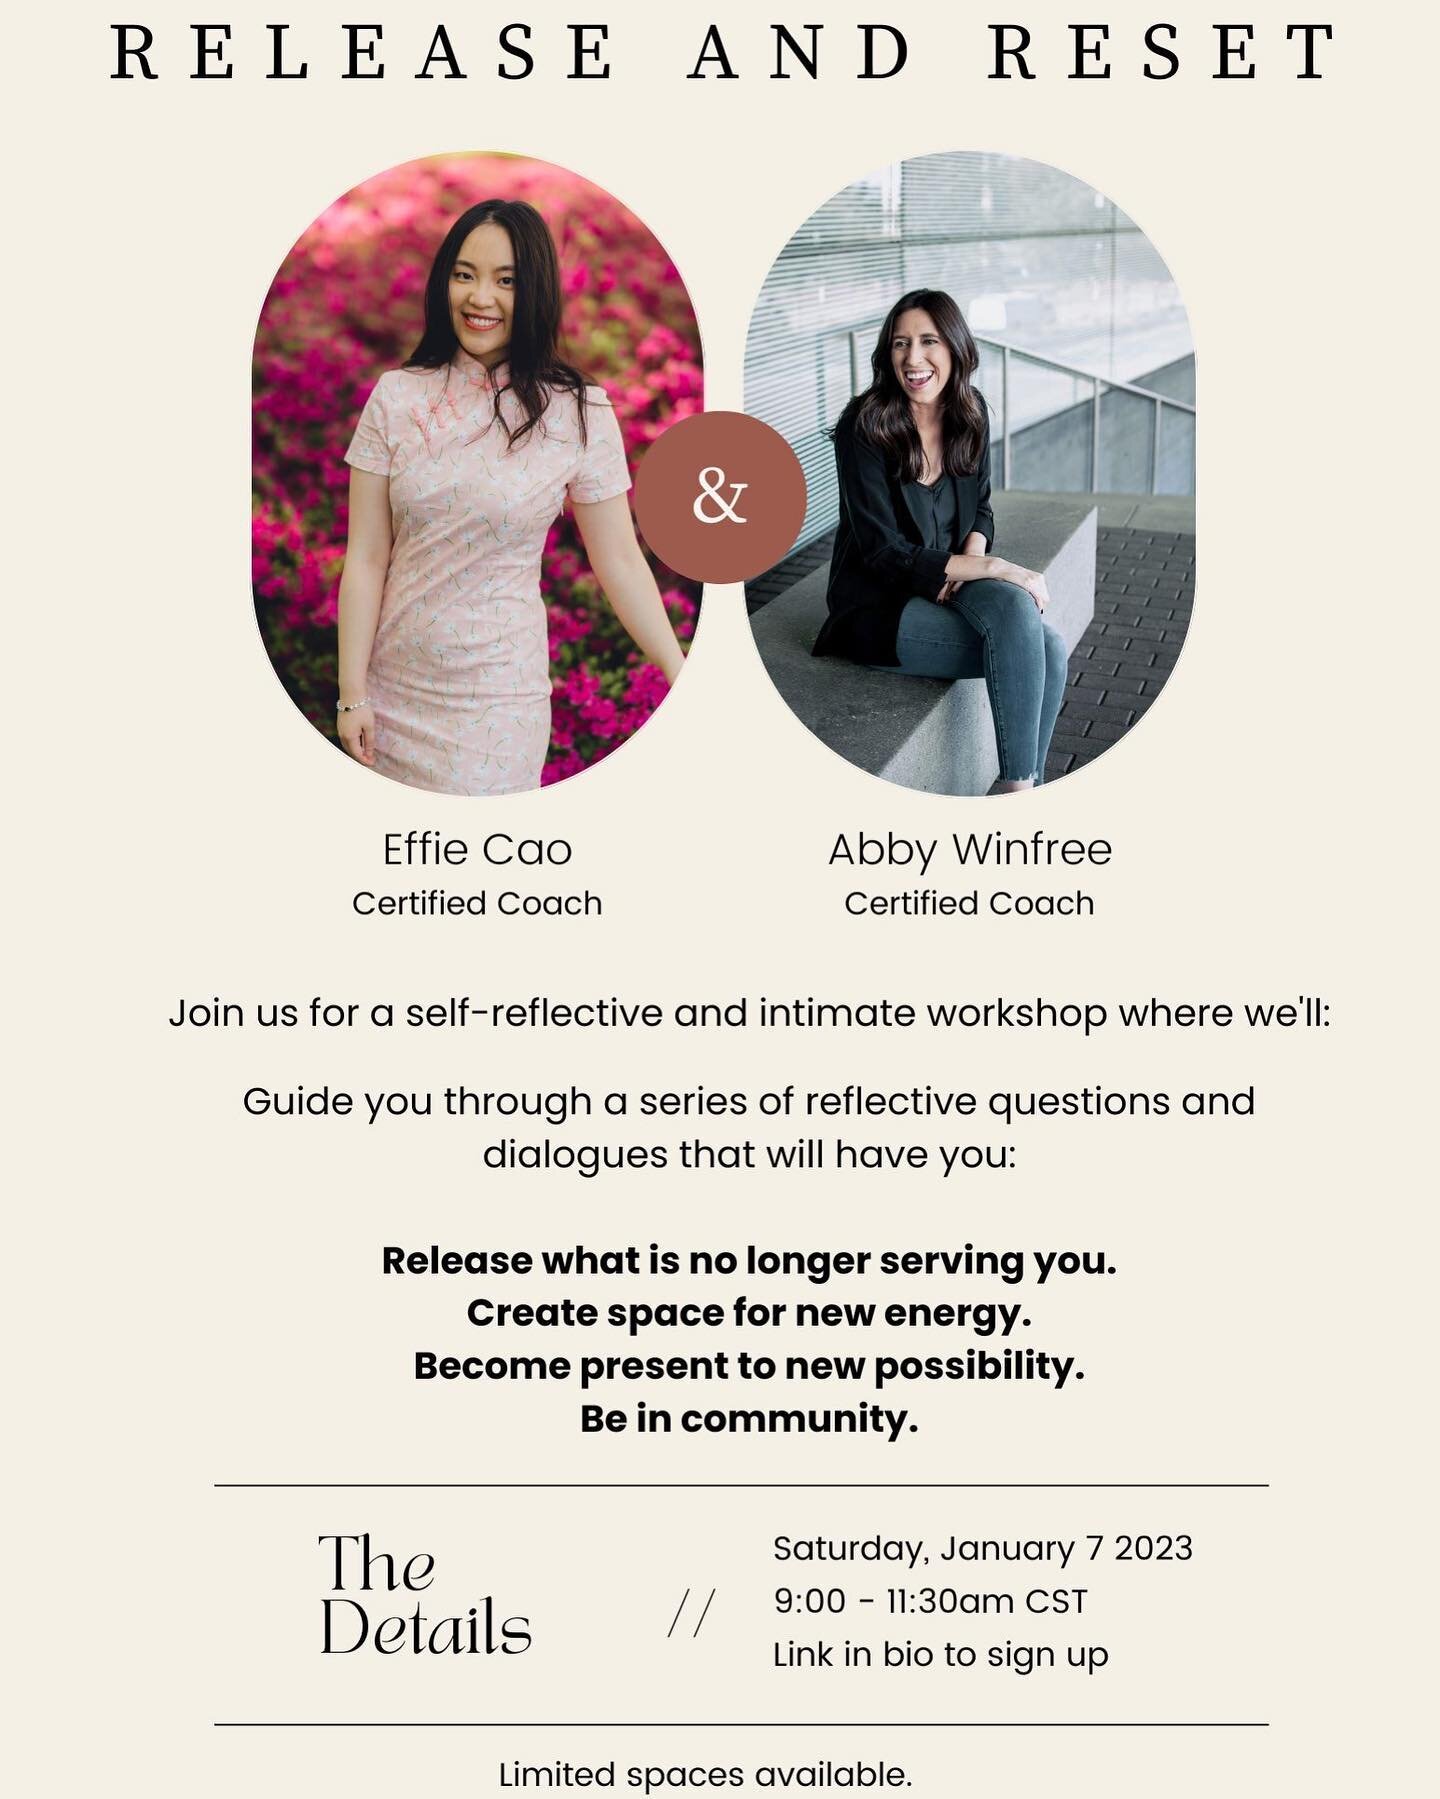 Hello community! What a year it has been! As my fellow coach Abby Winfree @spacetobecoaching and I reflect on this year&rsquo;s journey and ways to prepare ourselves better for the new year, we decided to create an intimate workshop with the communit